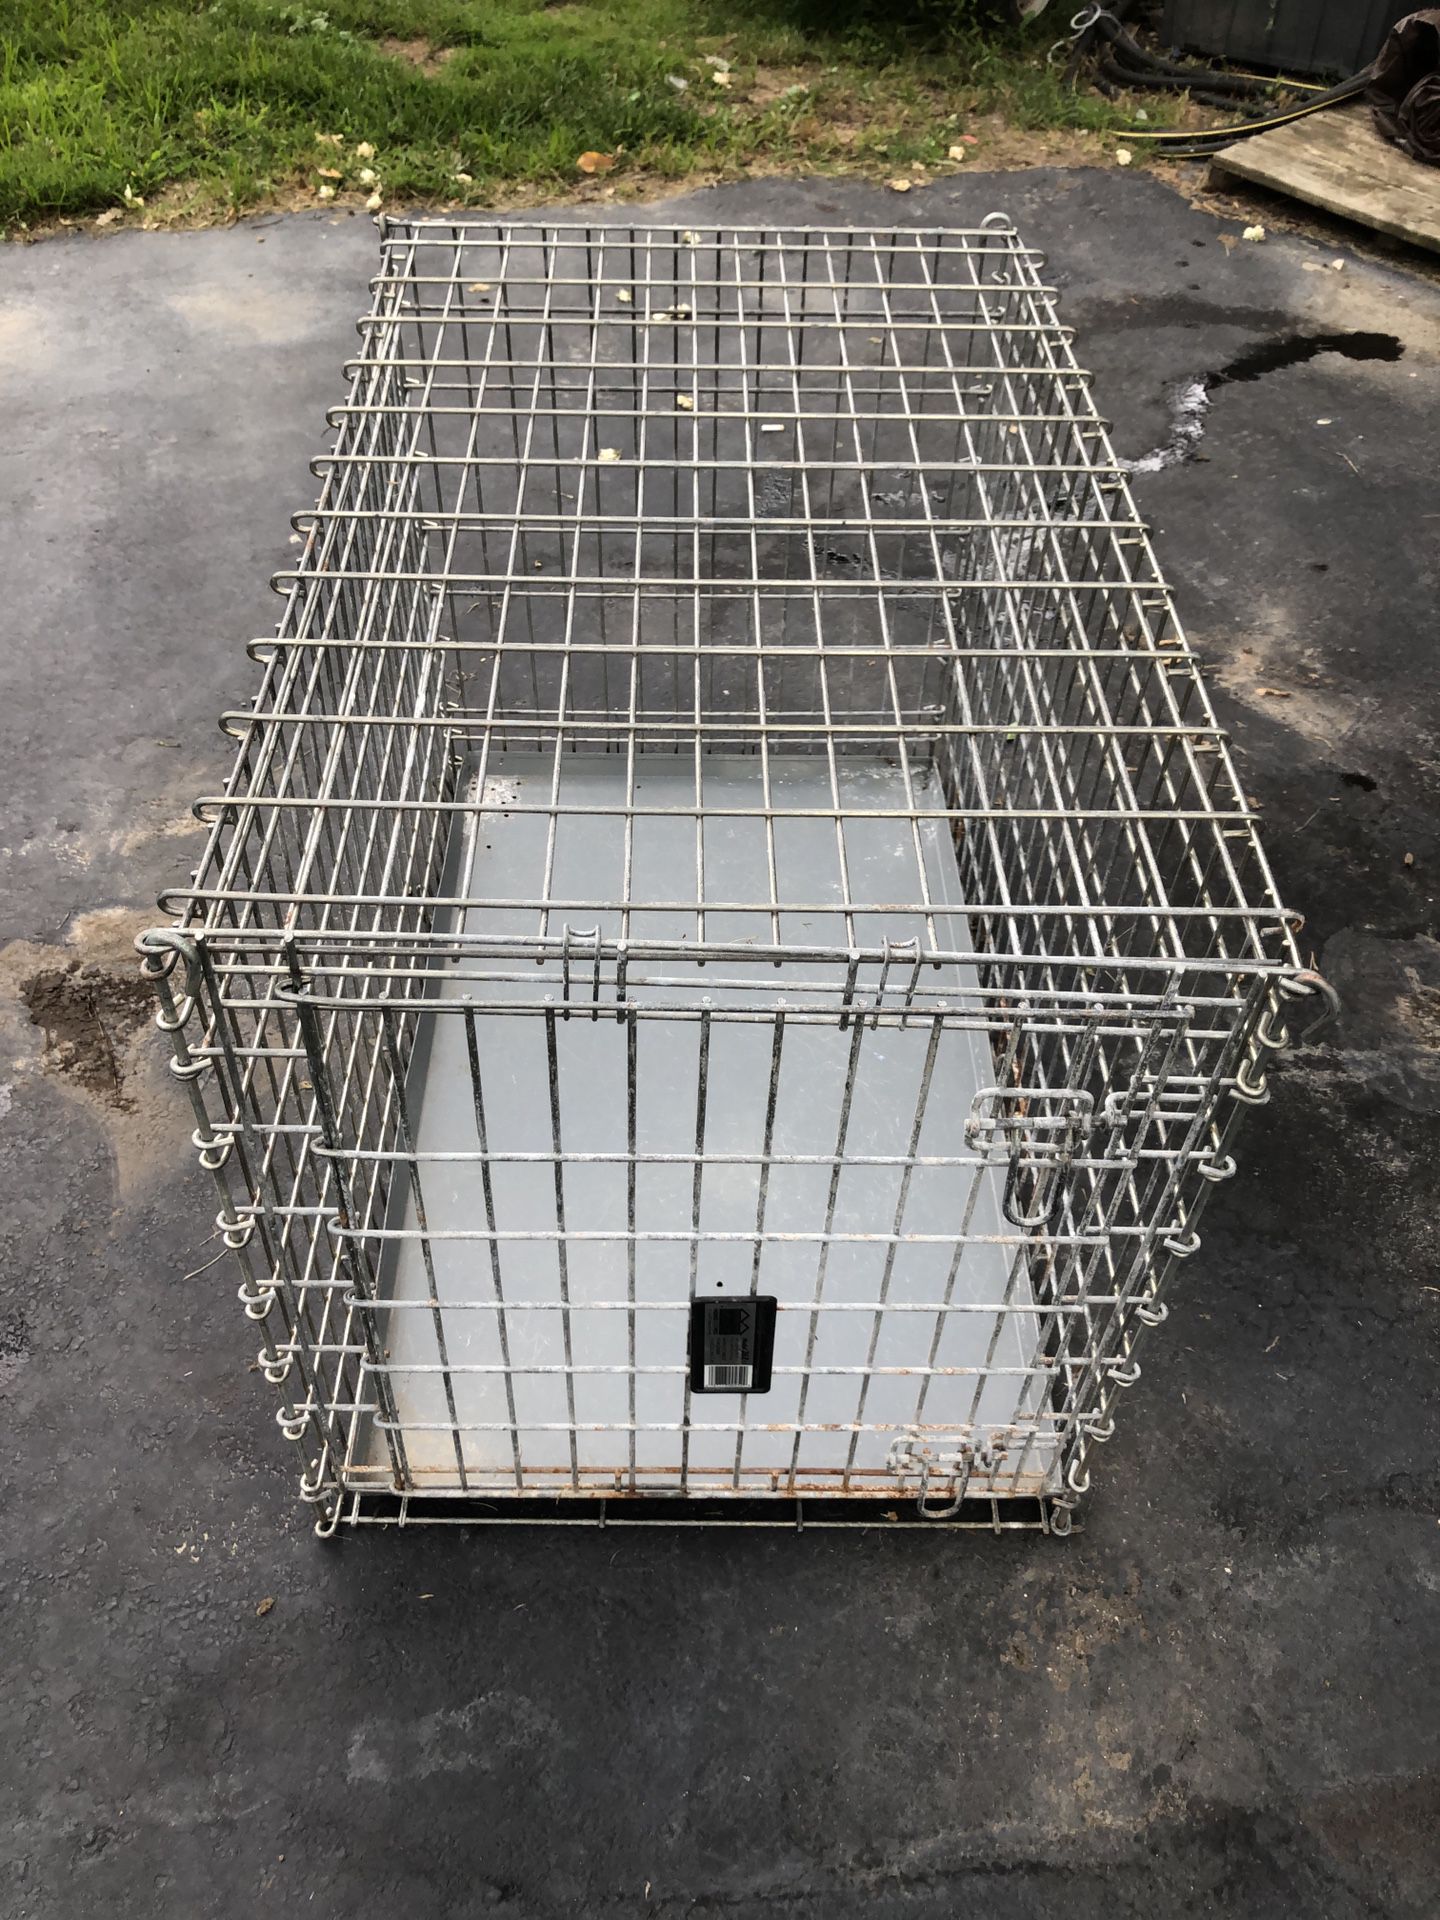 Steel dog crate